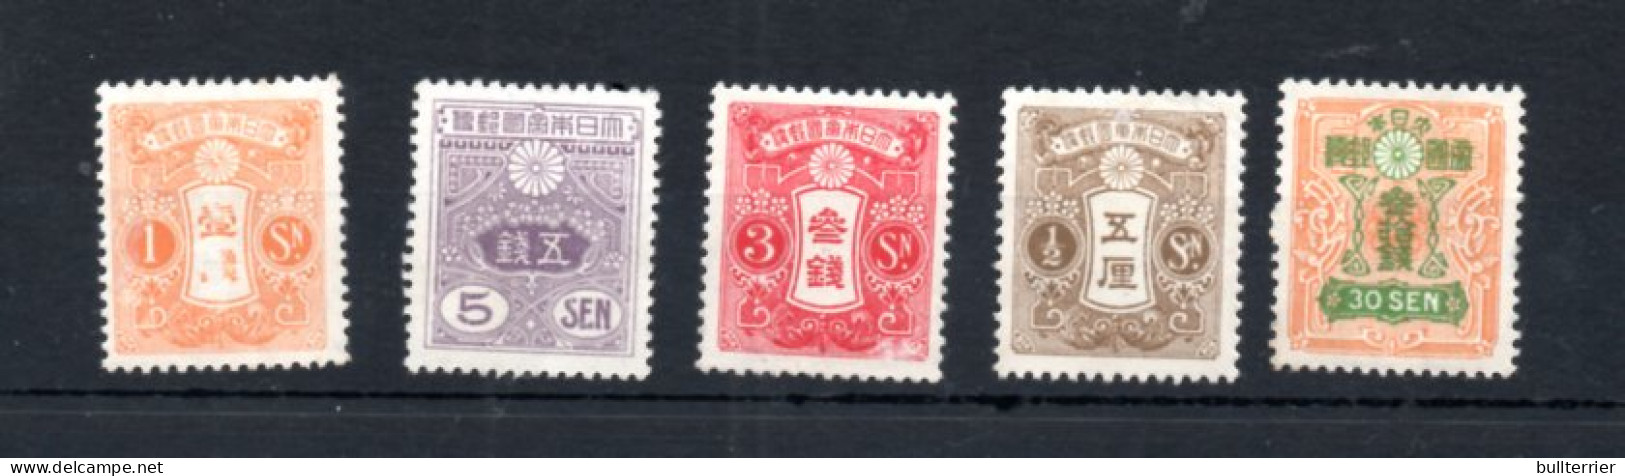 JAPAN - 1914 - 1//2, 1,3, 5 AND 30SEN VALUES  MINT NEVER HINGED SOME GUM SPECKS  SG CAT £65,  - Nuovi